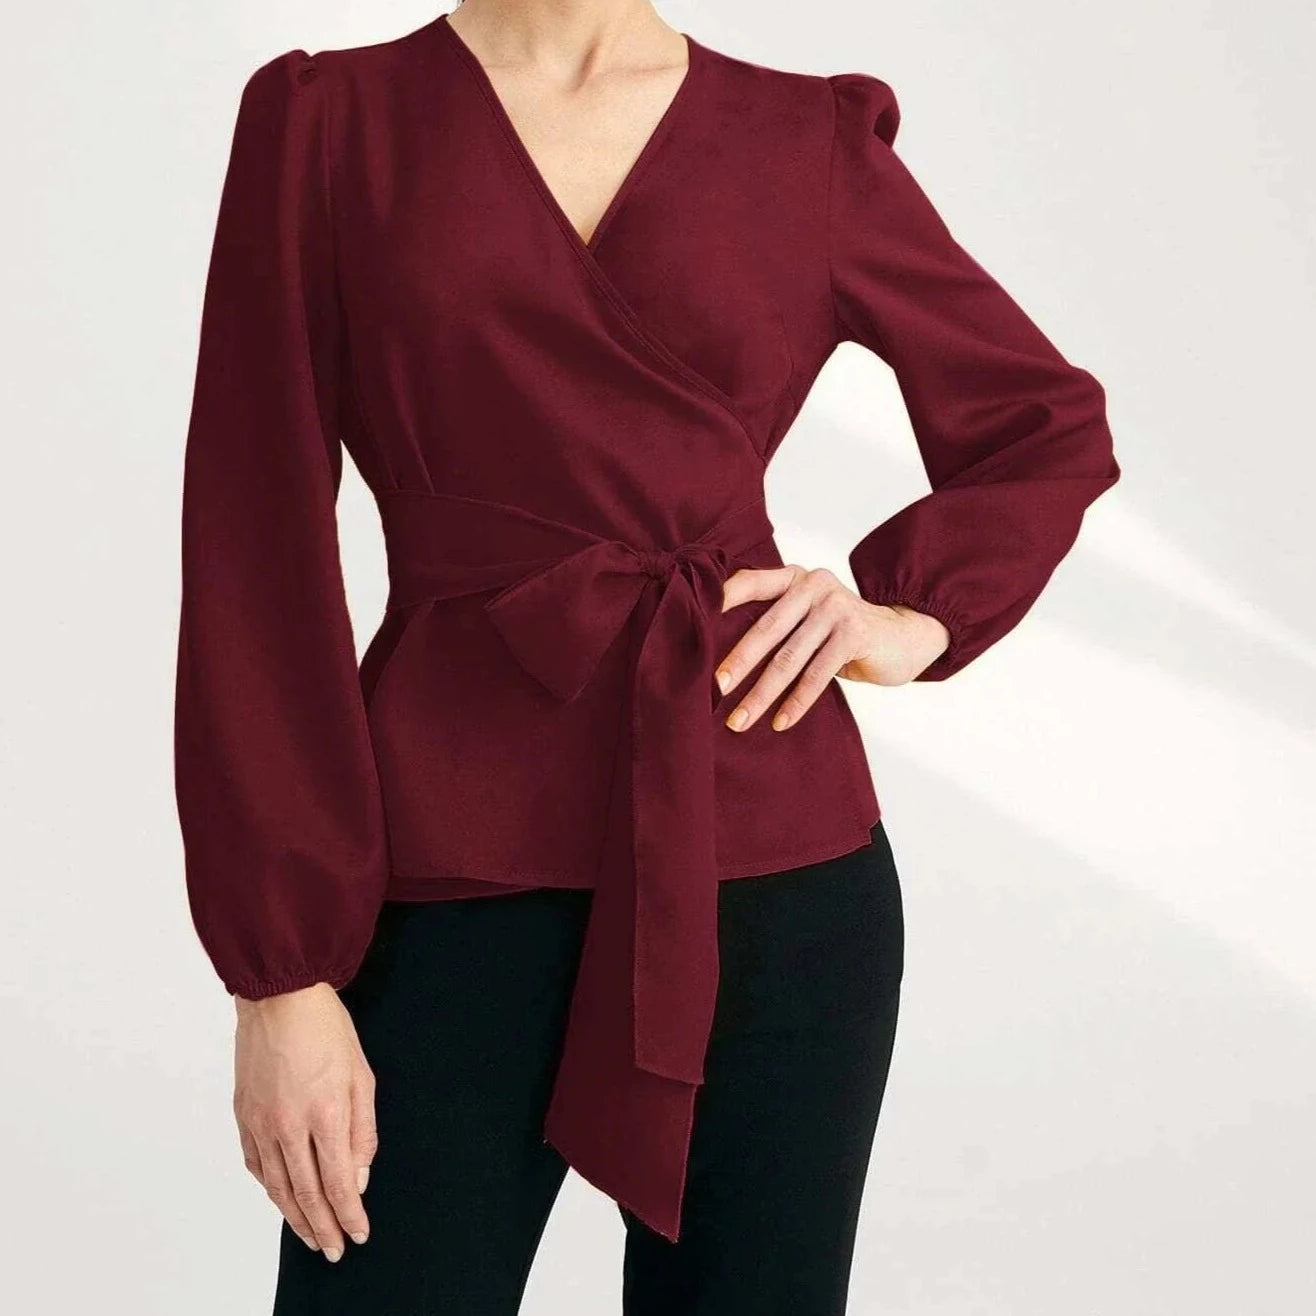 Buy Shein Solid Surplice Front Belted Blouse in Pakistan